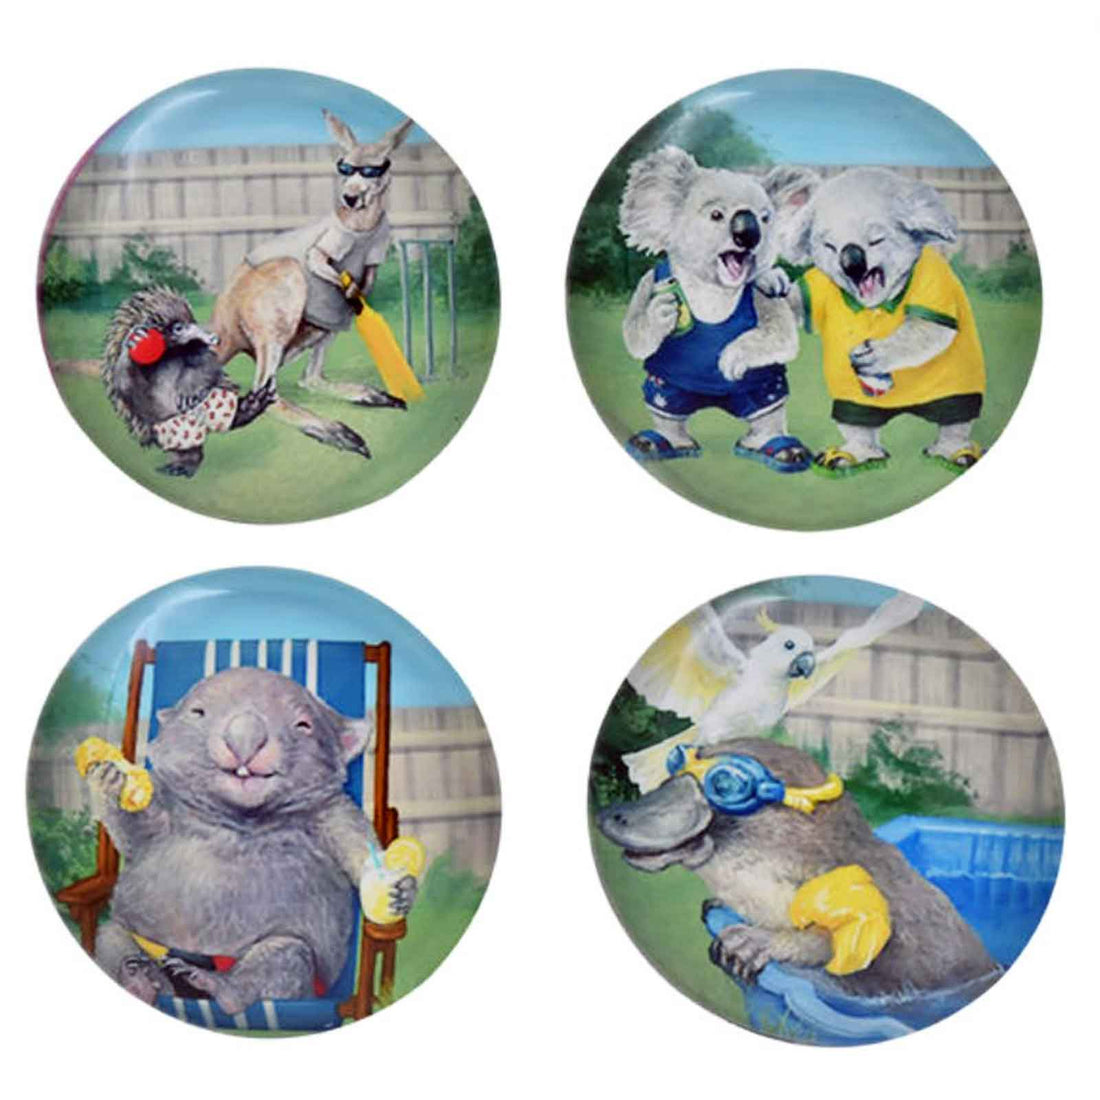 Aussie Mates Magnets - 4 different designs available